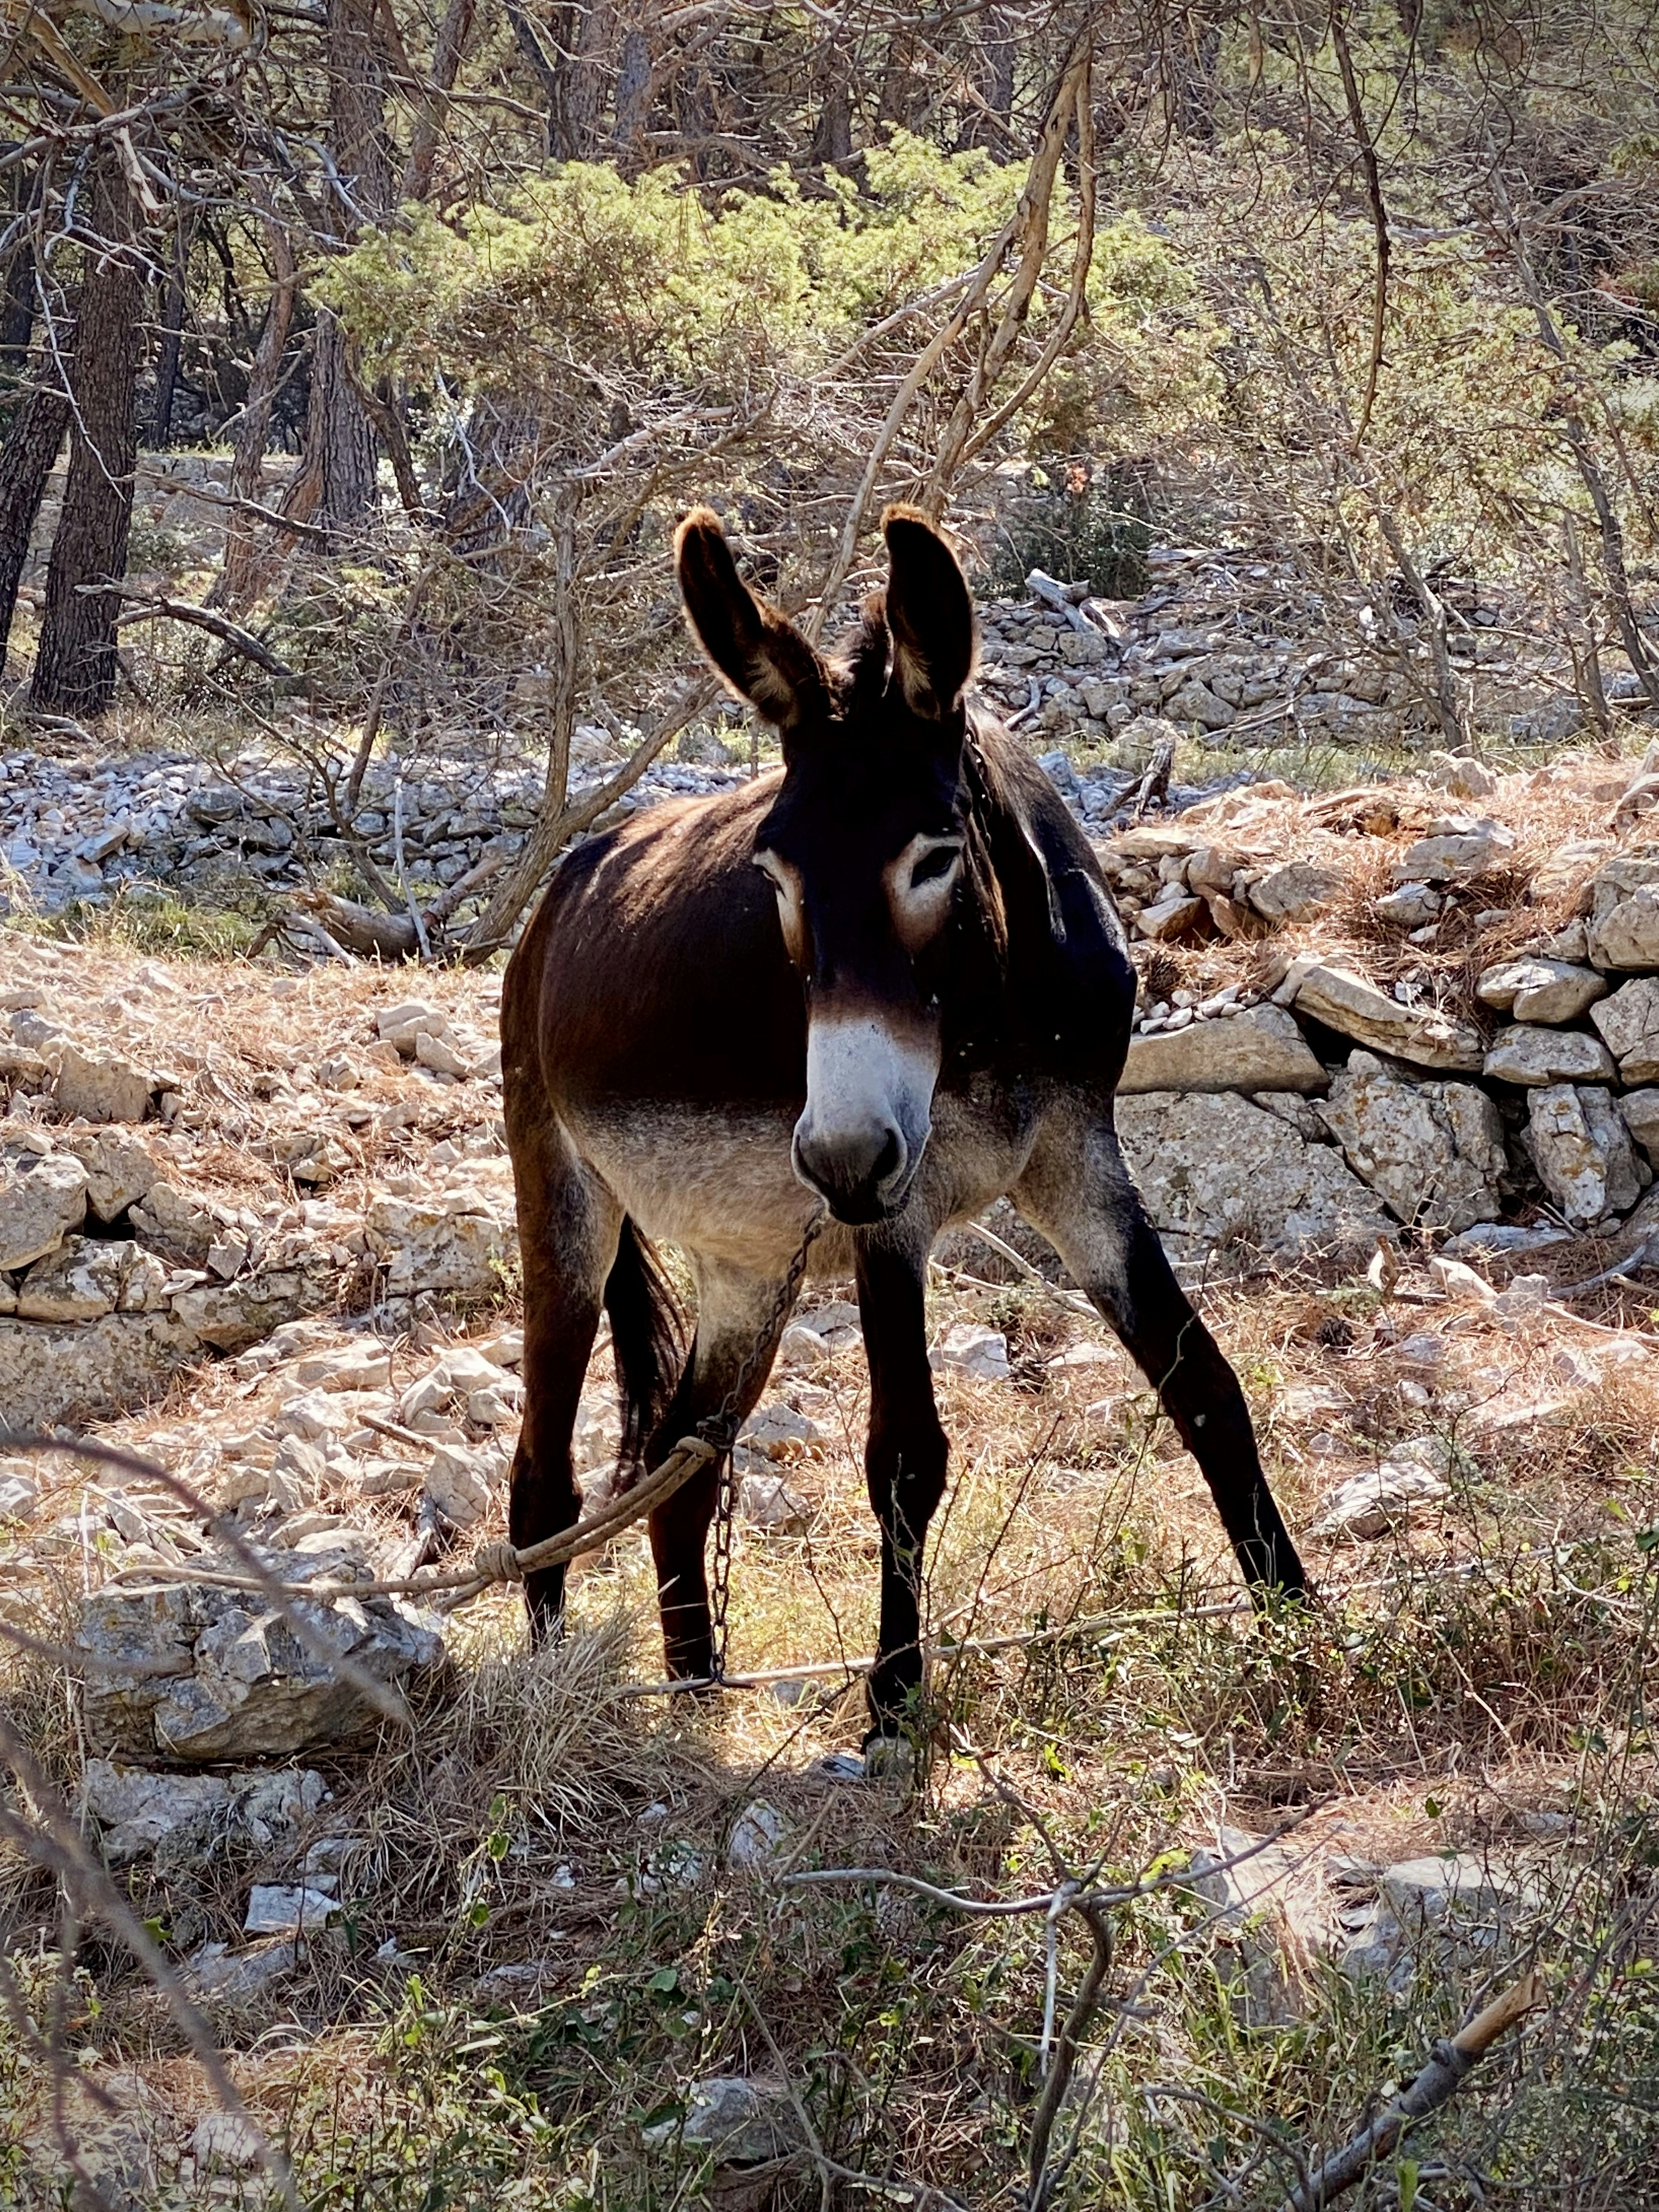 No donkey business here please. Donkey relaxes in the midday heat near the beach on the Croatian island of Mali Losinj.